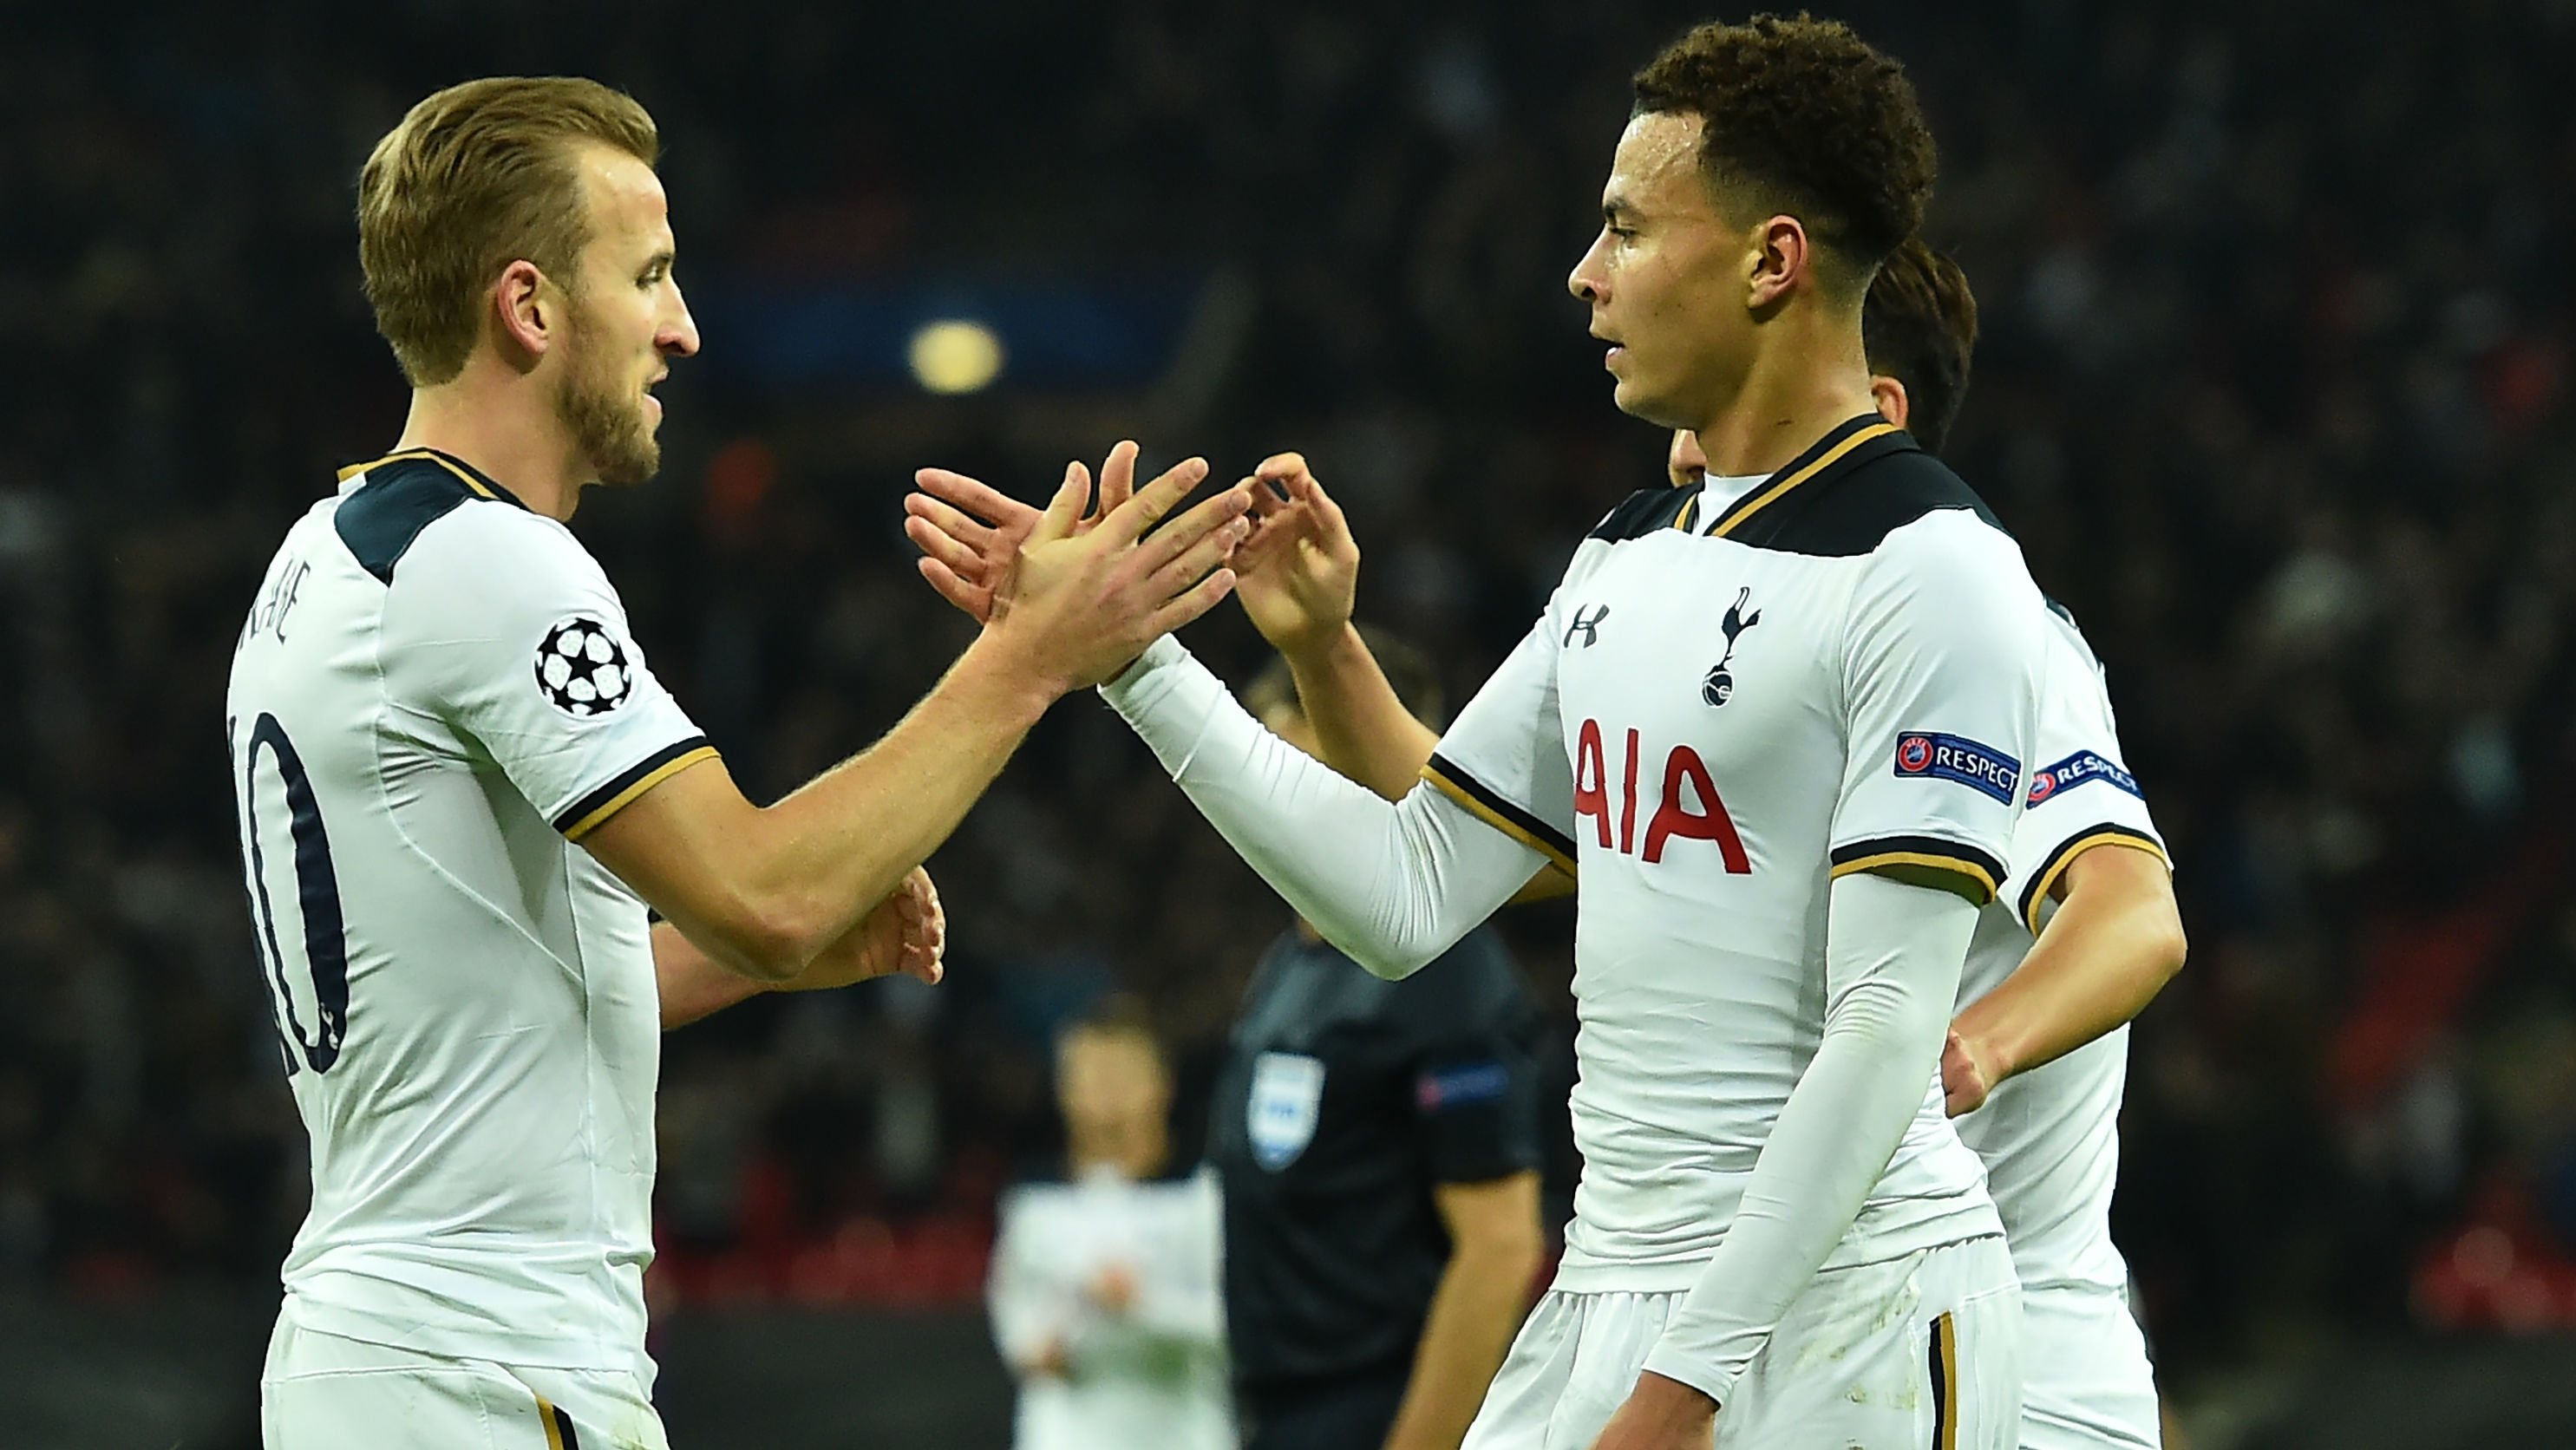 Harry Kane and Dele Alli of Spurs